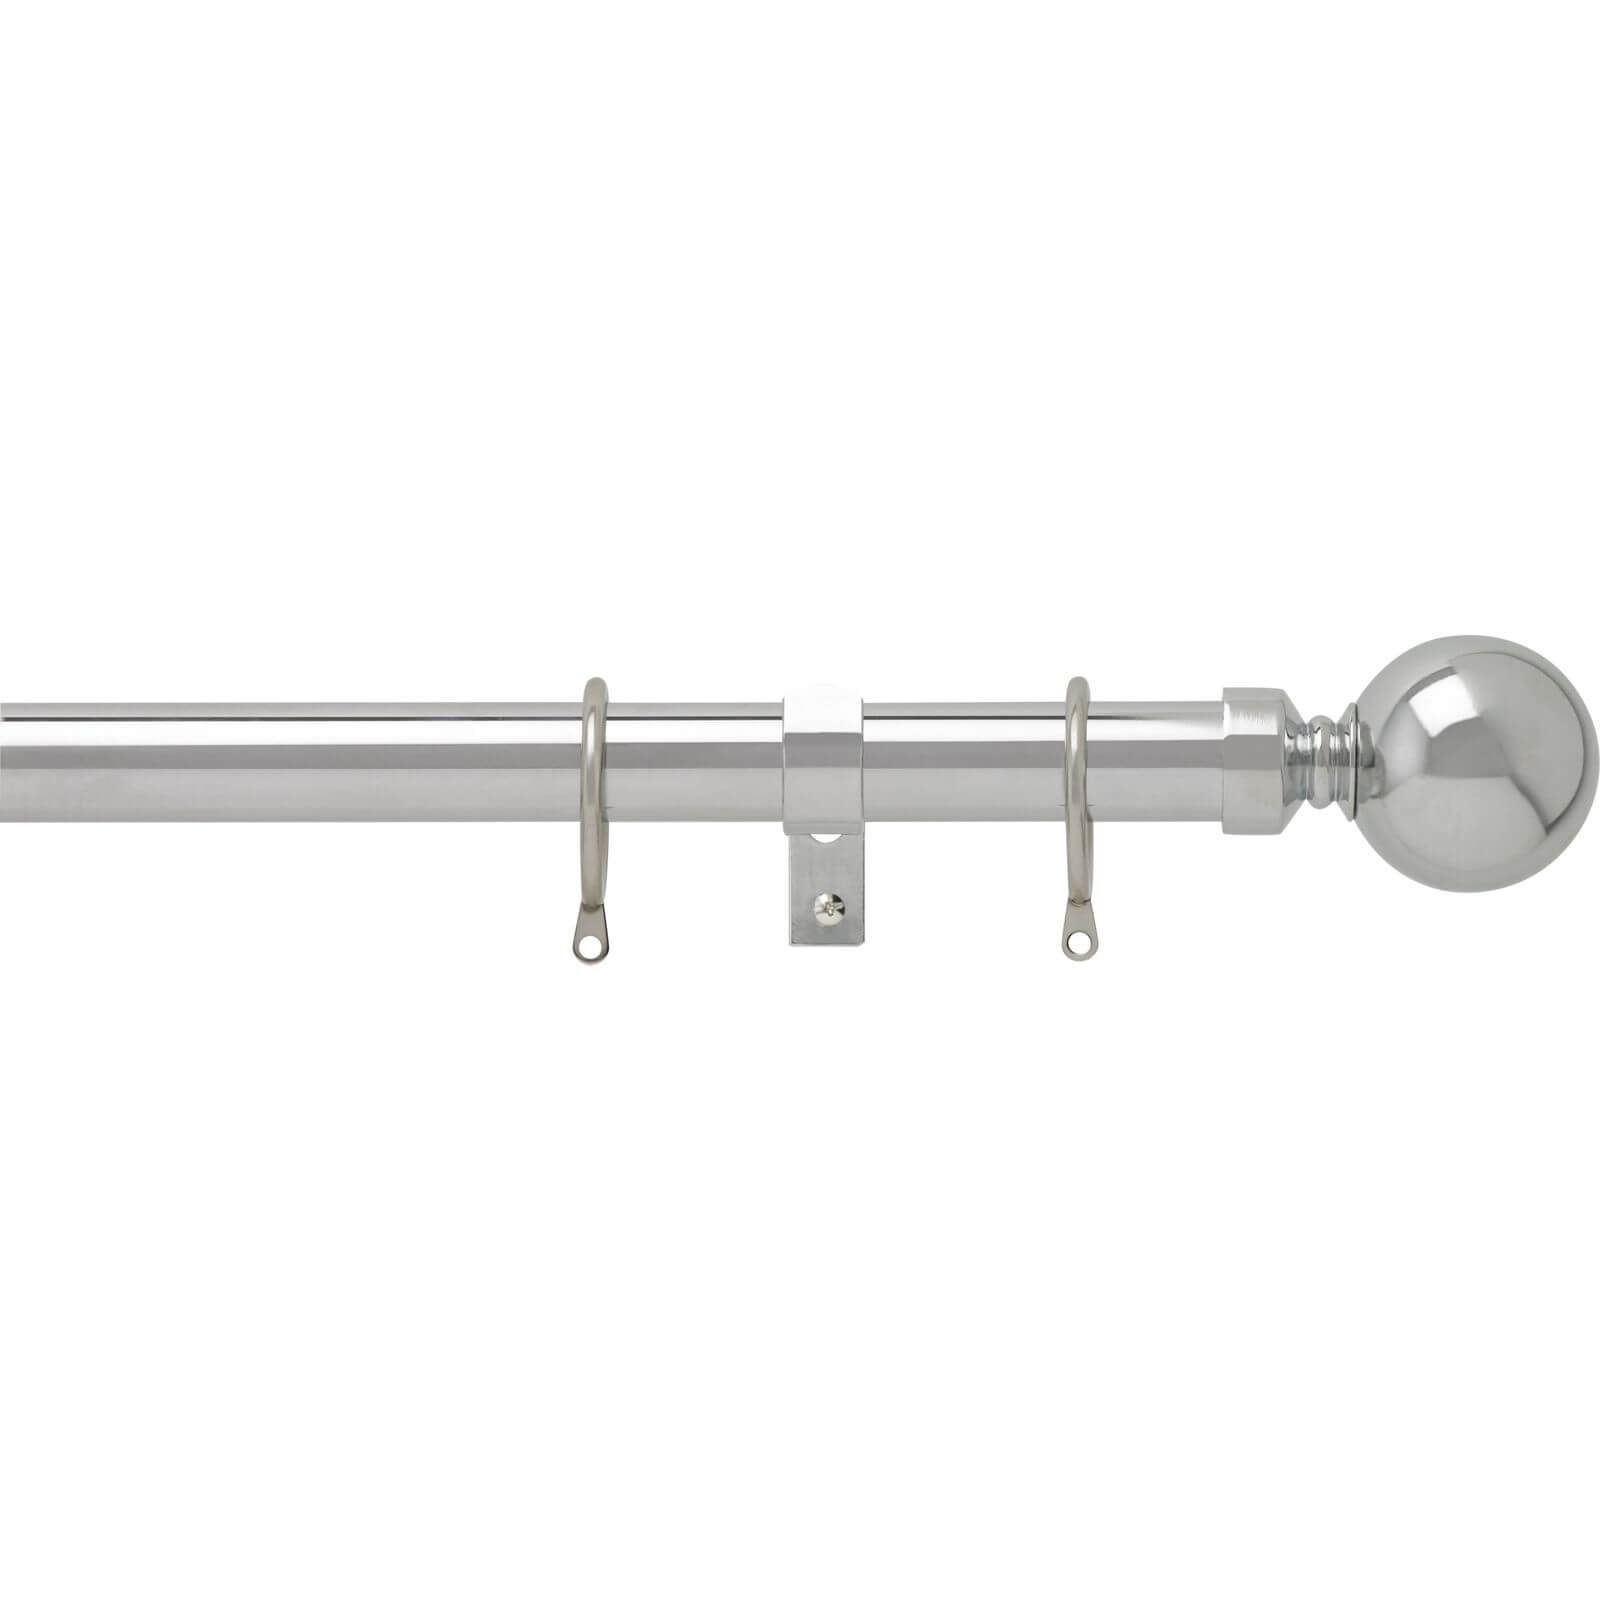 Chrome 28mm Fixed Curtain Pole With Ball 1.8m